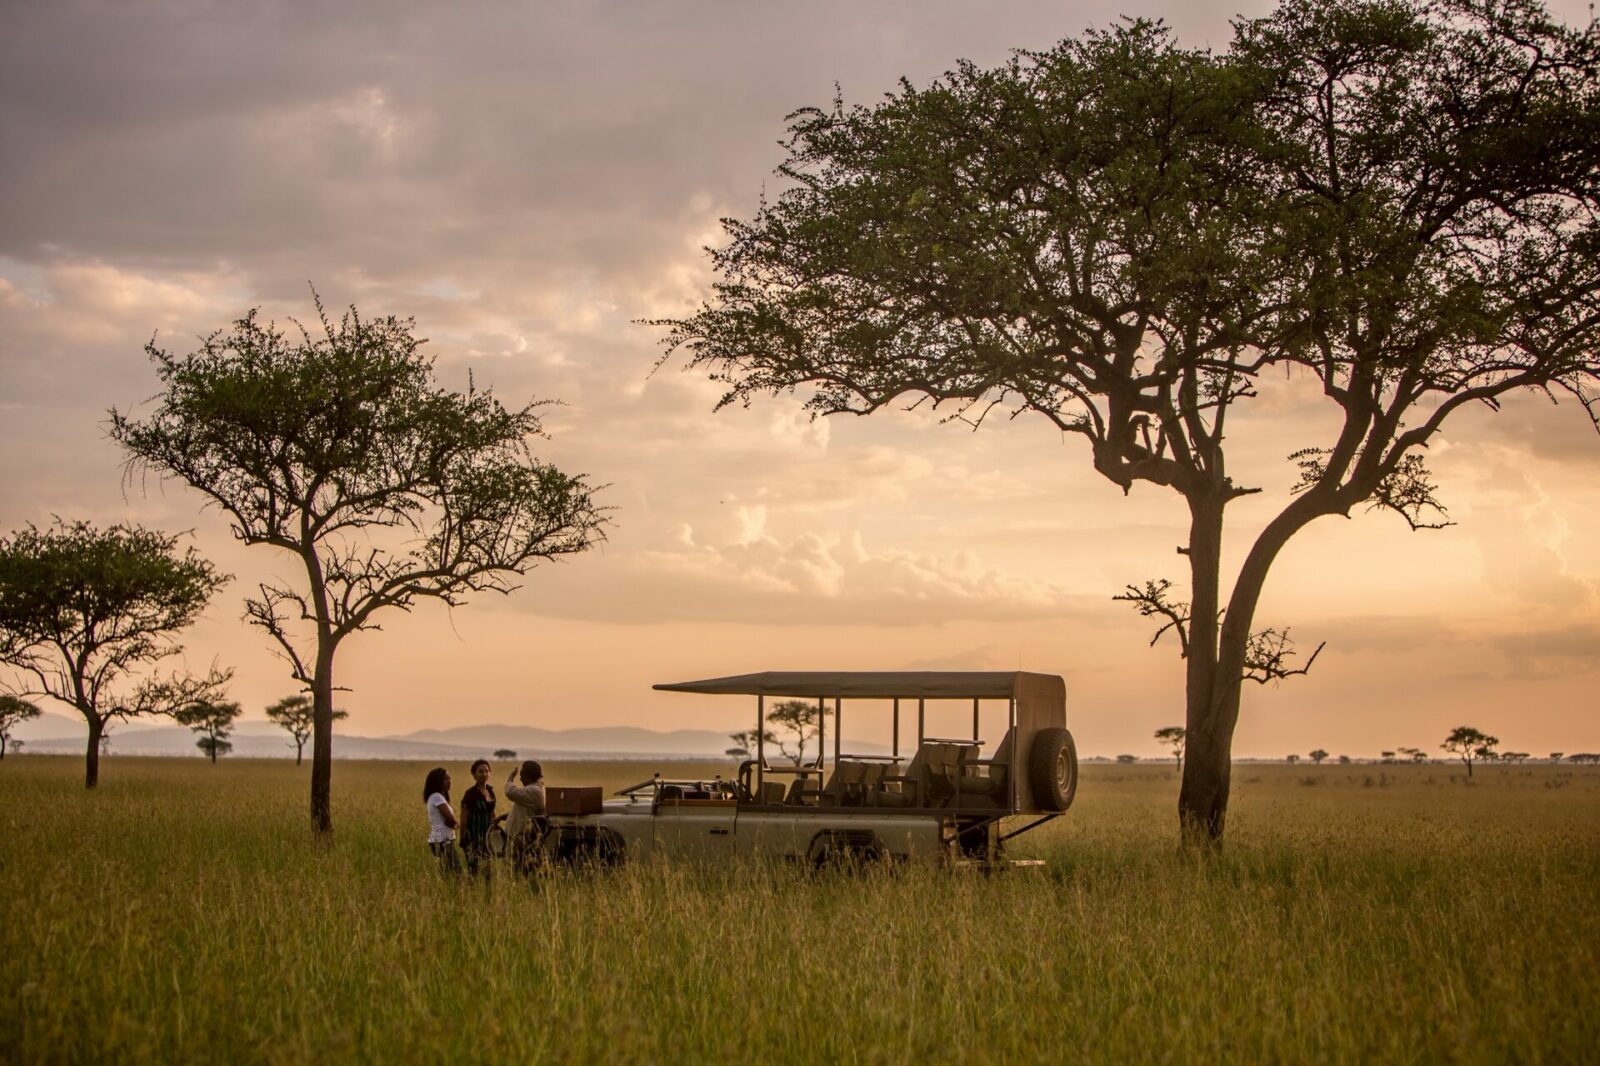 Image of an open-sided safari vehicle parked under the trees in the African bush. 2 guests and a guide can be seen outside the vehicle. Courtesy of Singita | TrueAfrica | Blog | Singita